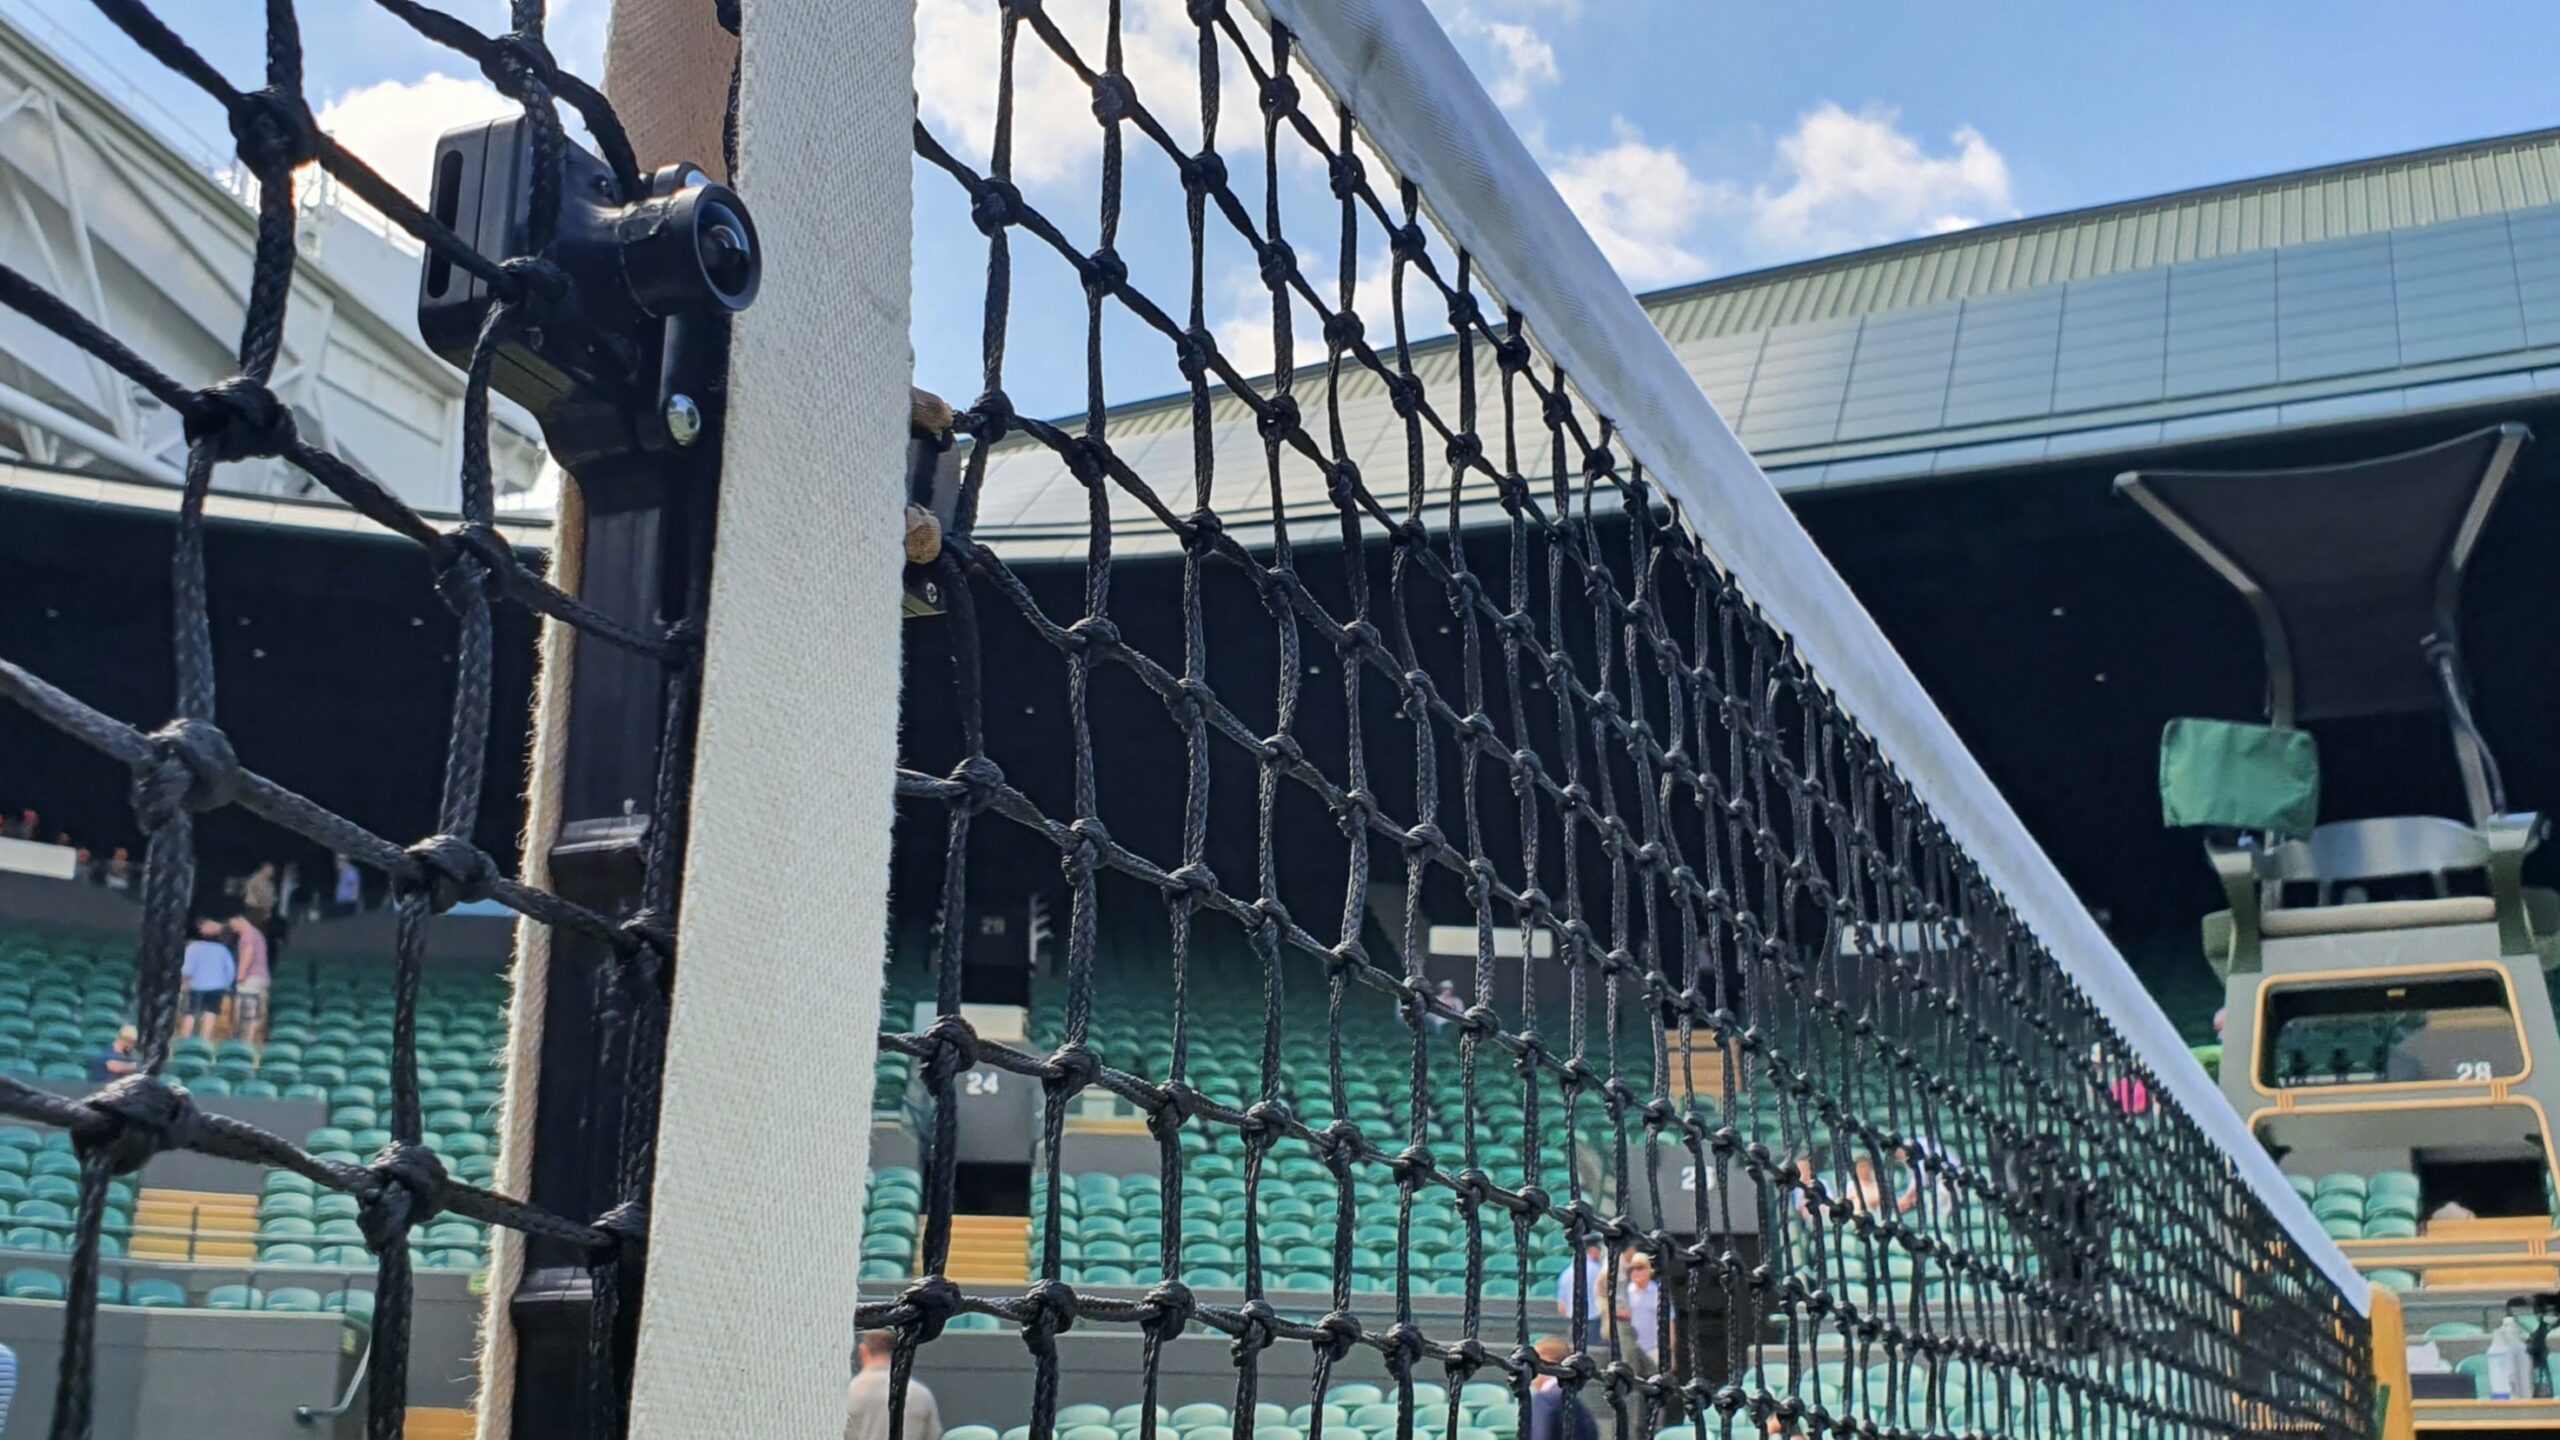 Media Australia Secures New Agreement for Speciality Cameras for Coverage of Wimbledon